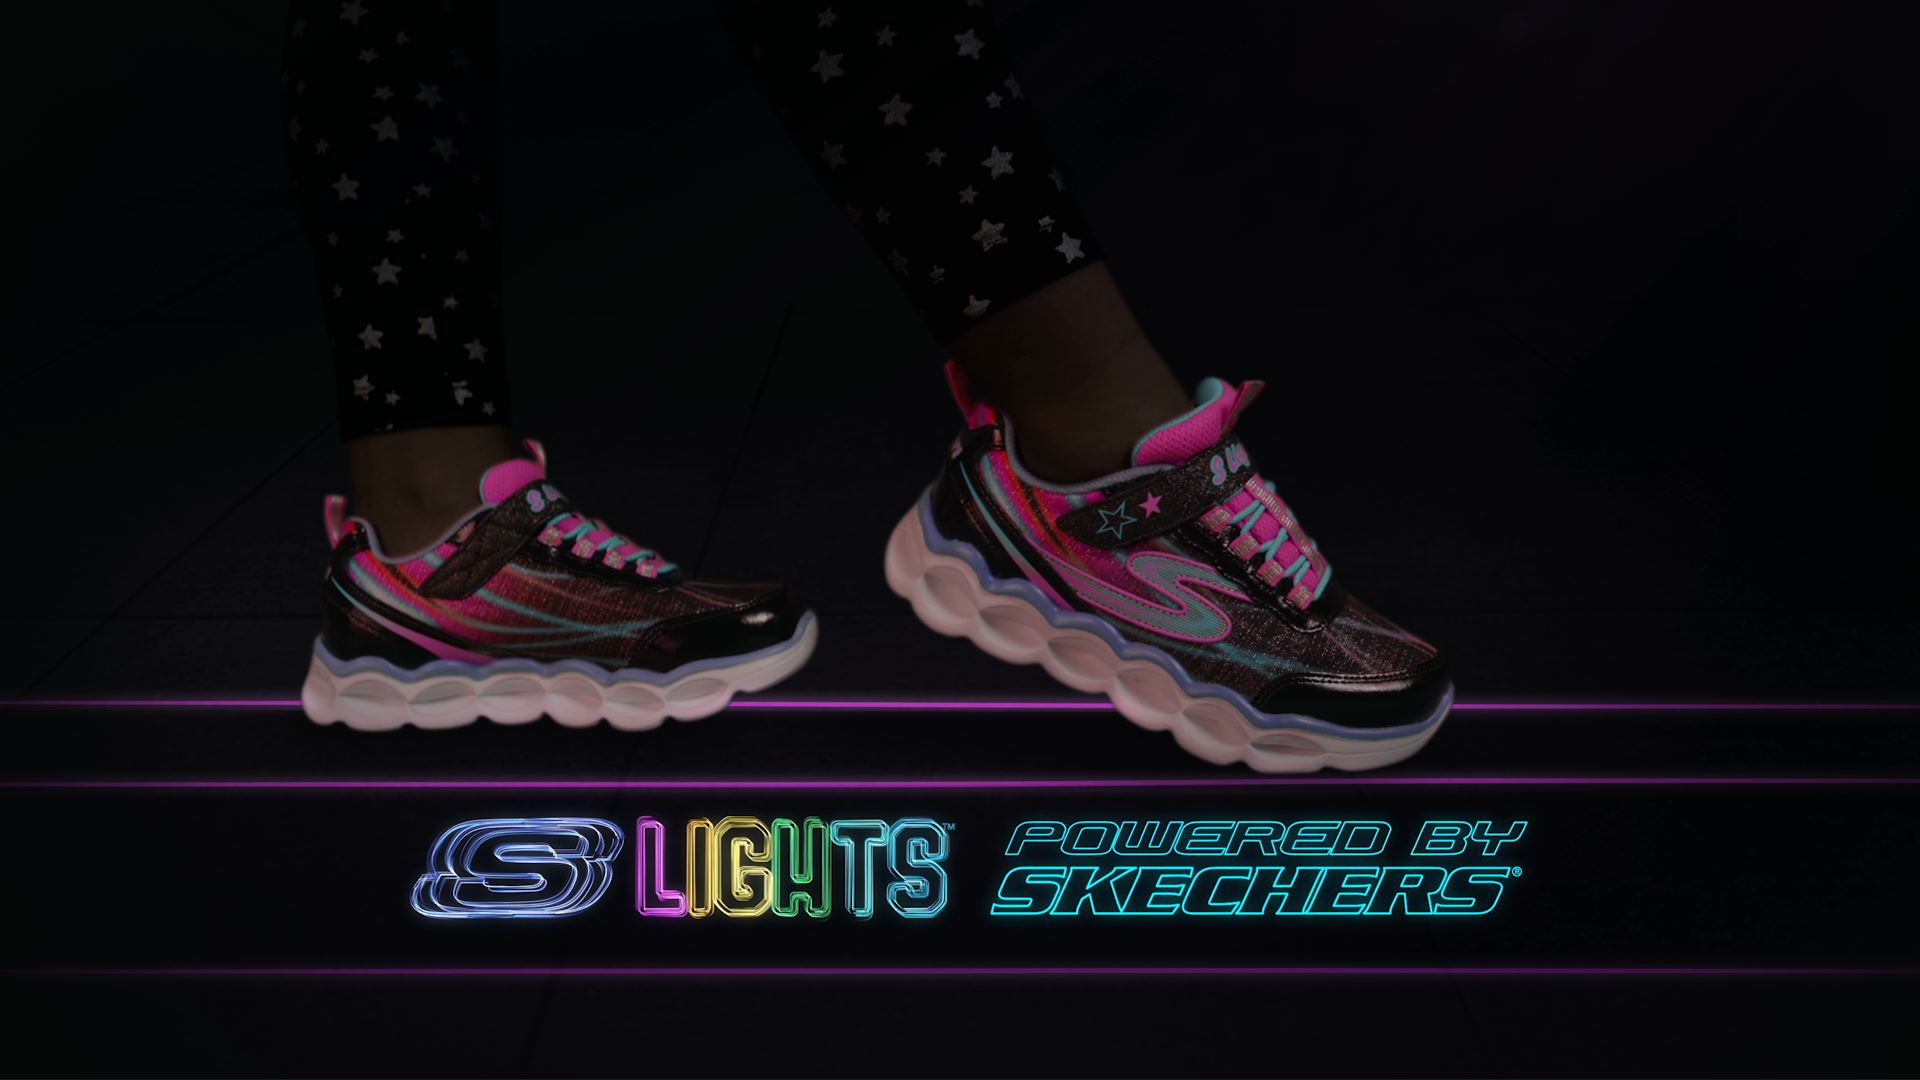 View All Skechers Commercials